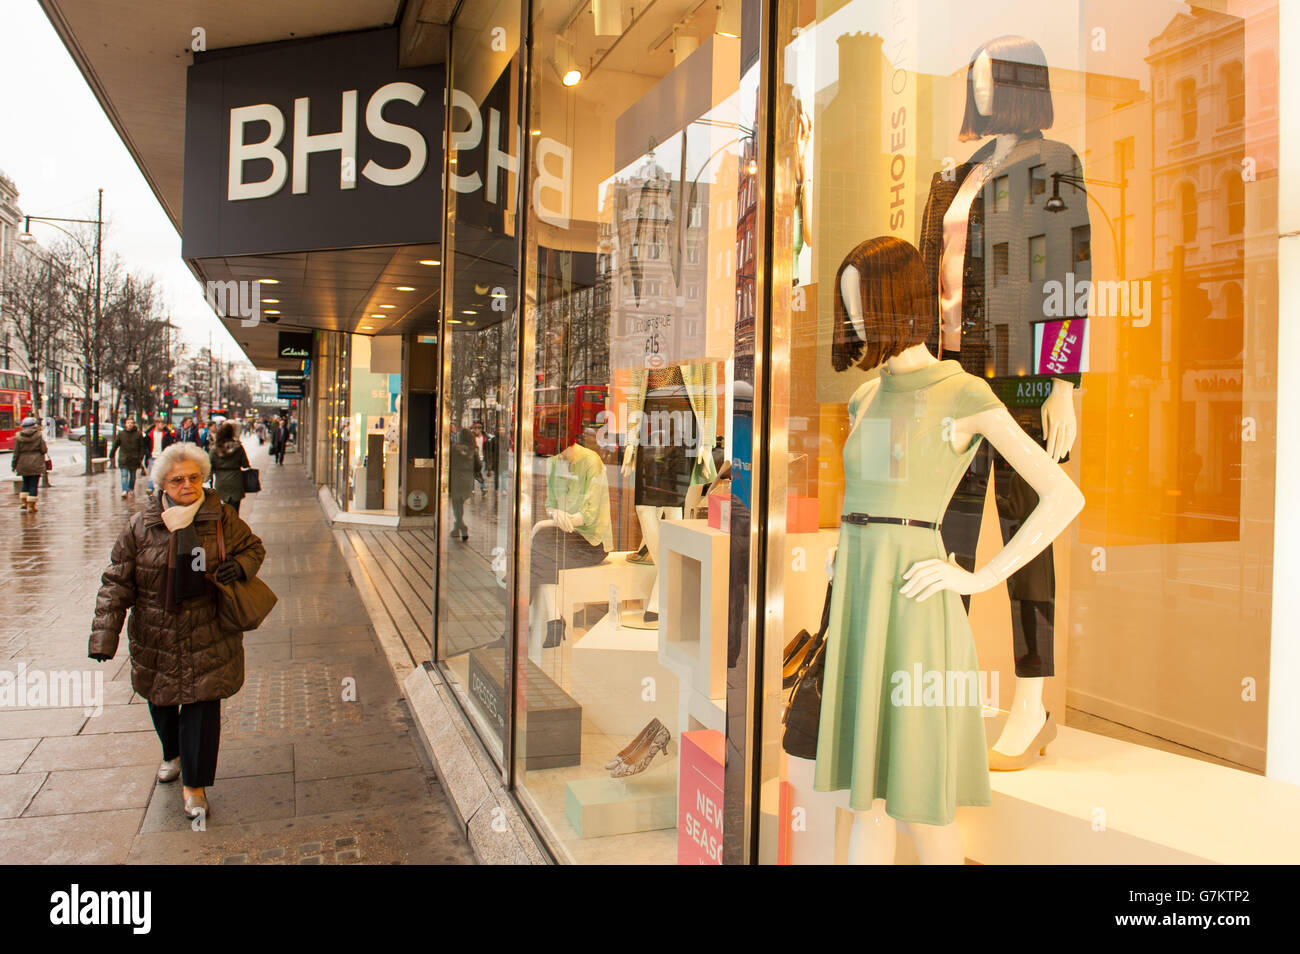 General view of a branch of BHS, on Oxford Street, London. Stock Photo